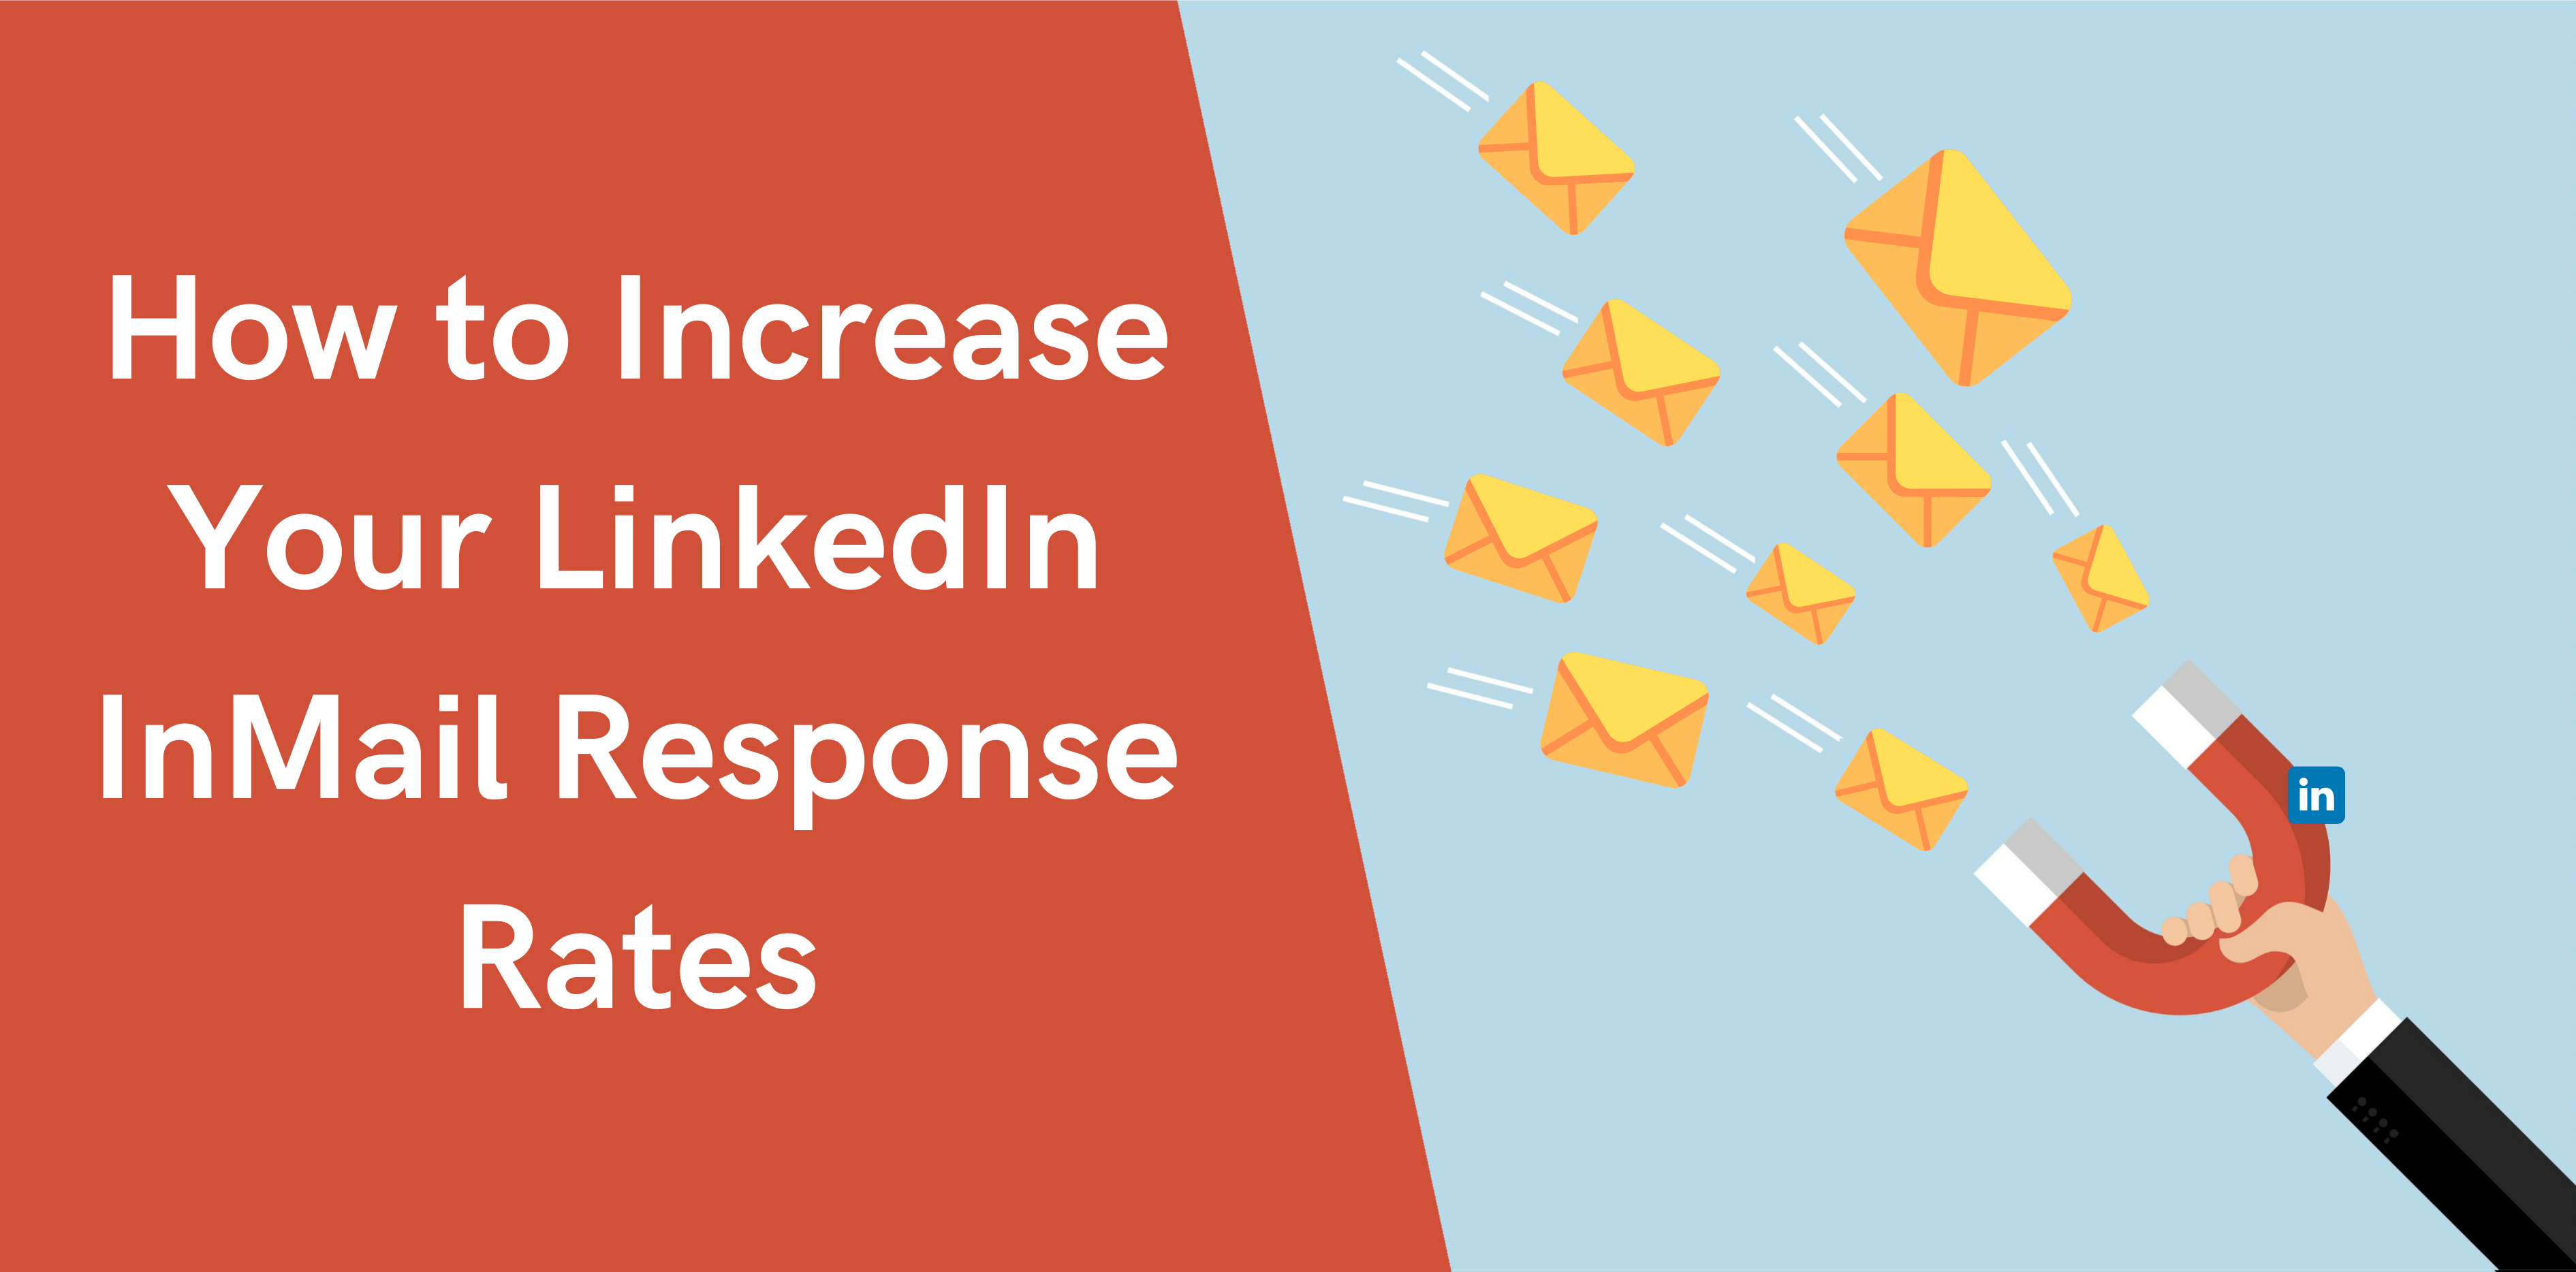 How-to Increase-Your-LinkedIn-InMail-Response-Rates